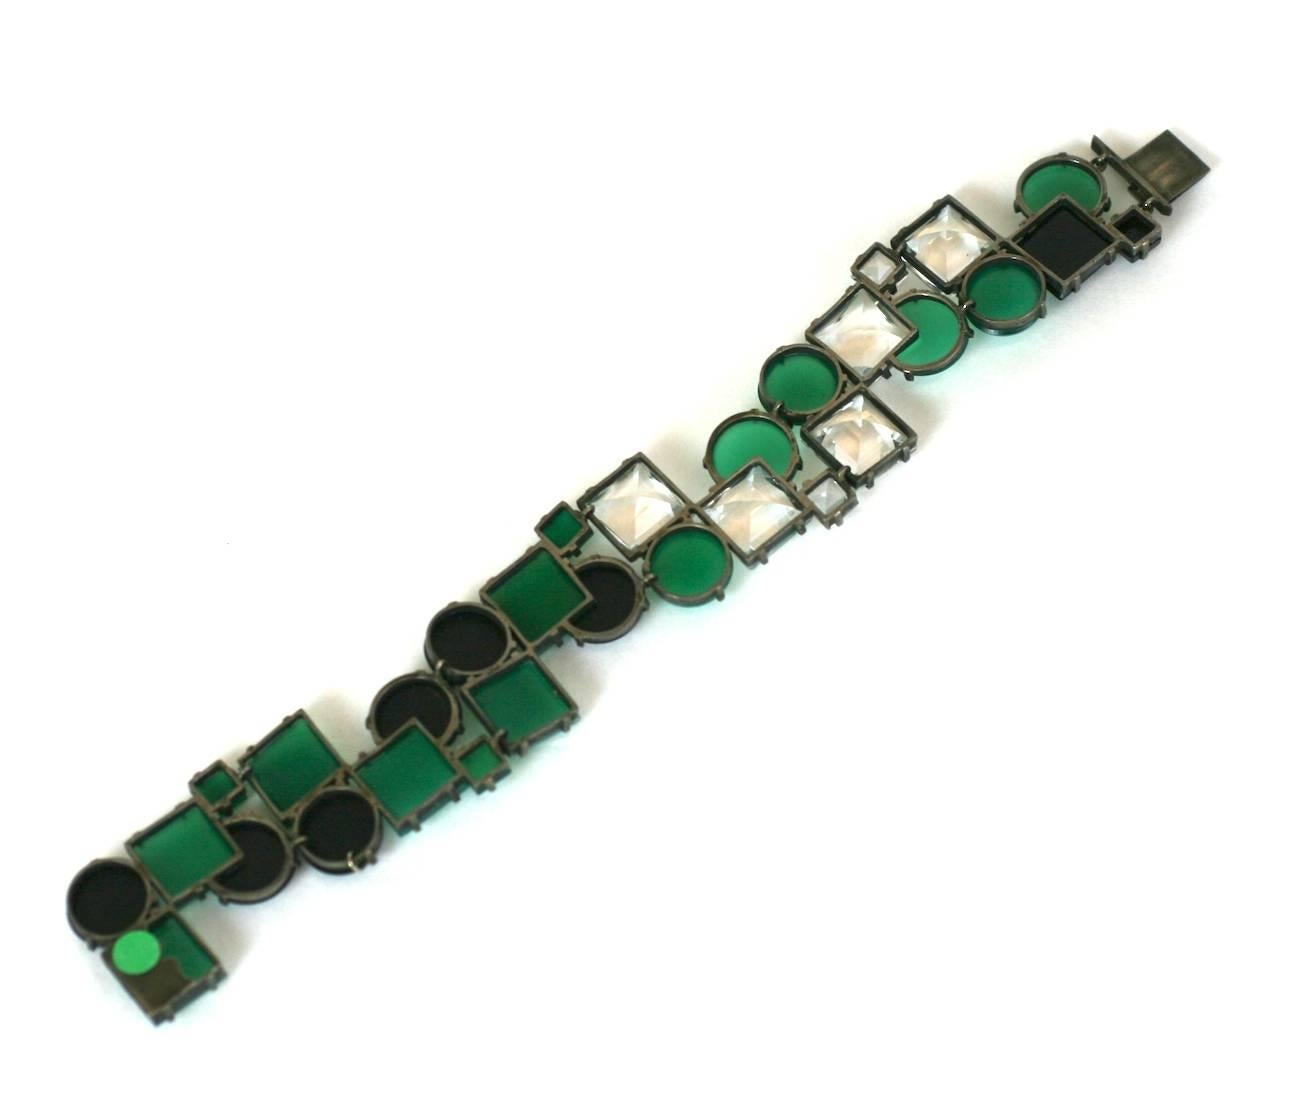 Important Art Deco Cubist Bracelet. 6 panels of articulated links forming a series of stone "tiles" in square, round and pac man shaped stones, cut from crysophrase (green onyx), onyx and rock crystal and all hand set in sterling